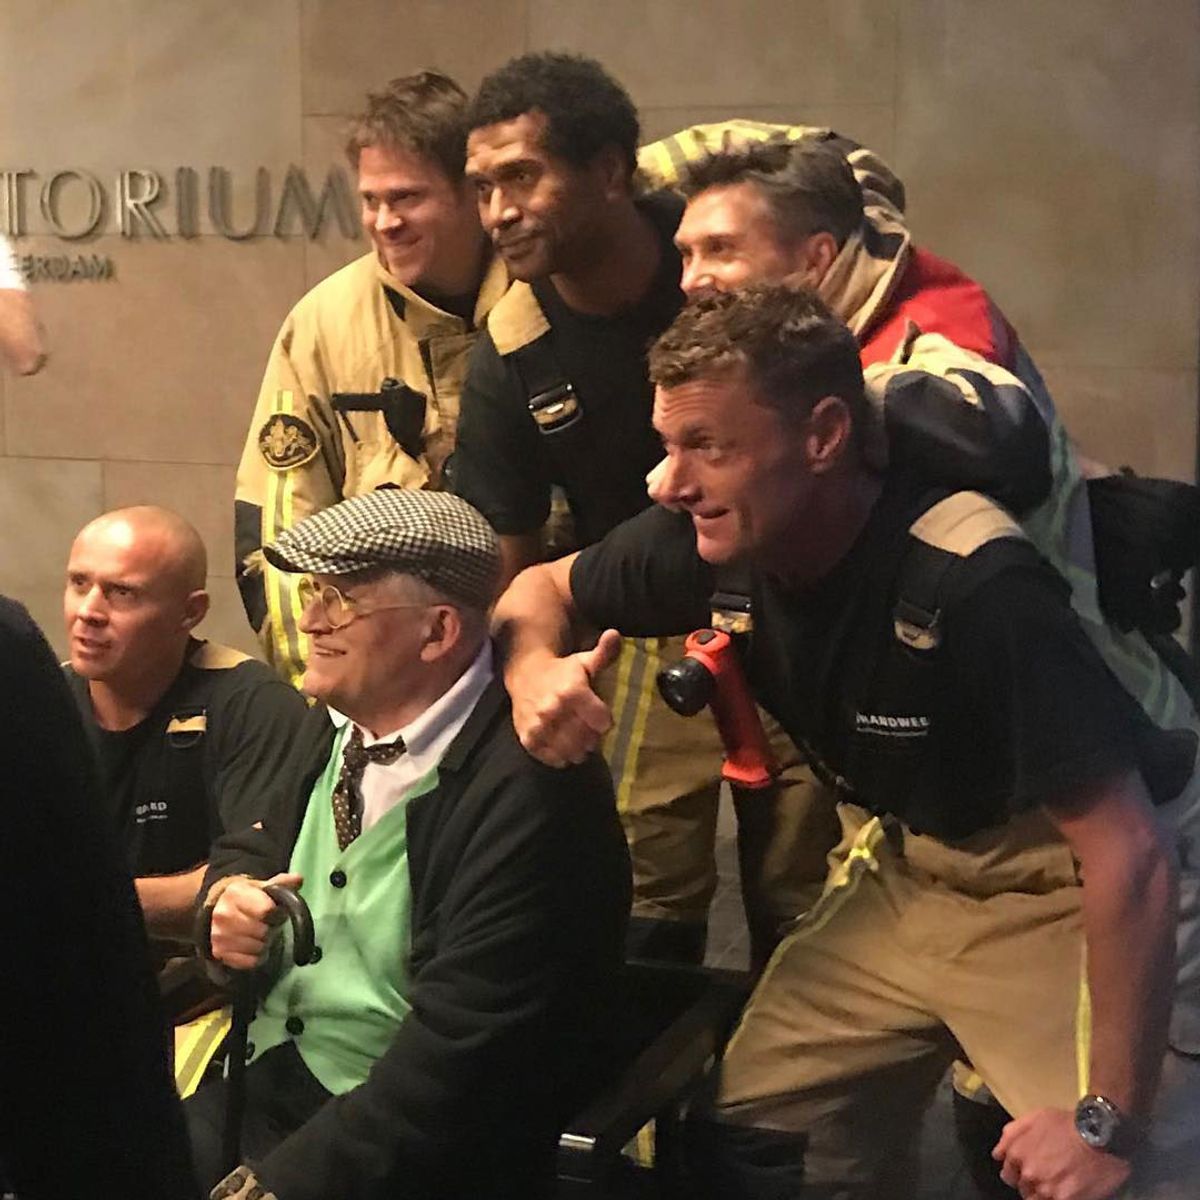 David Hockney with the Dutch firemen who rescued him from a lift in Amsterdam © davidelidawson/Instagram